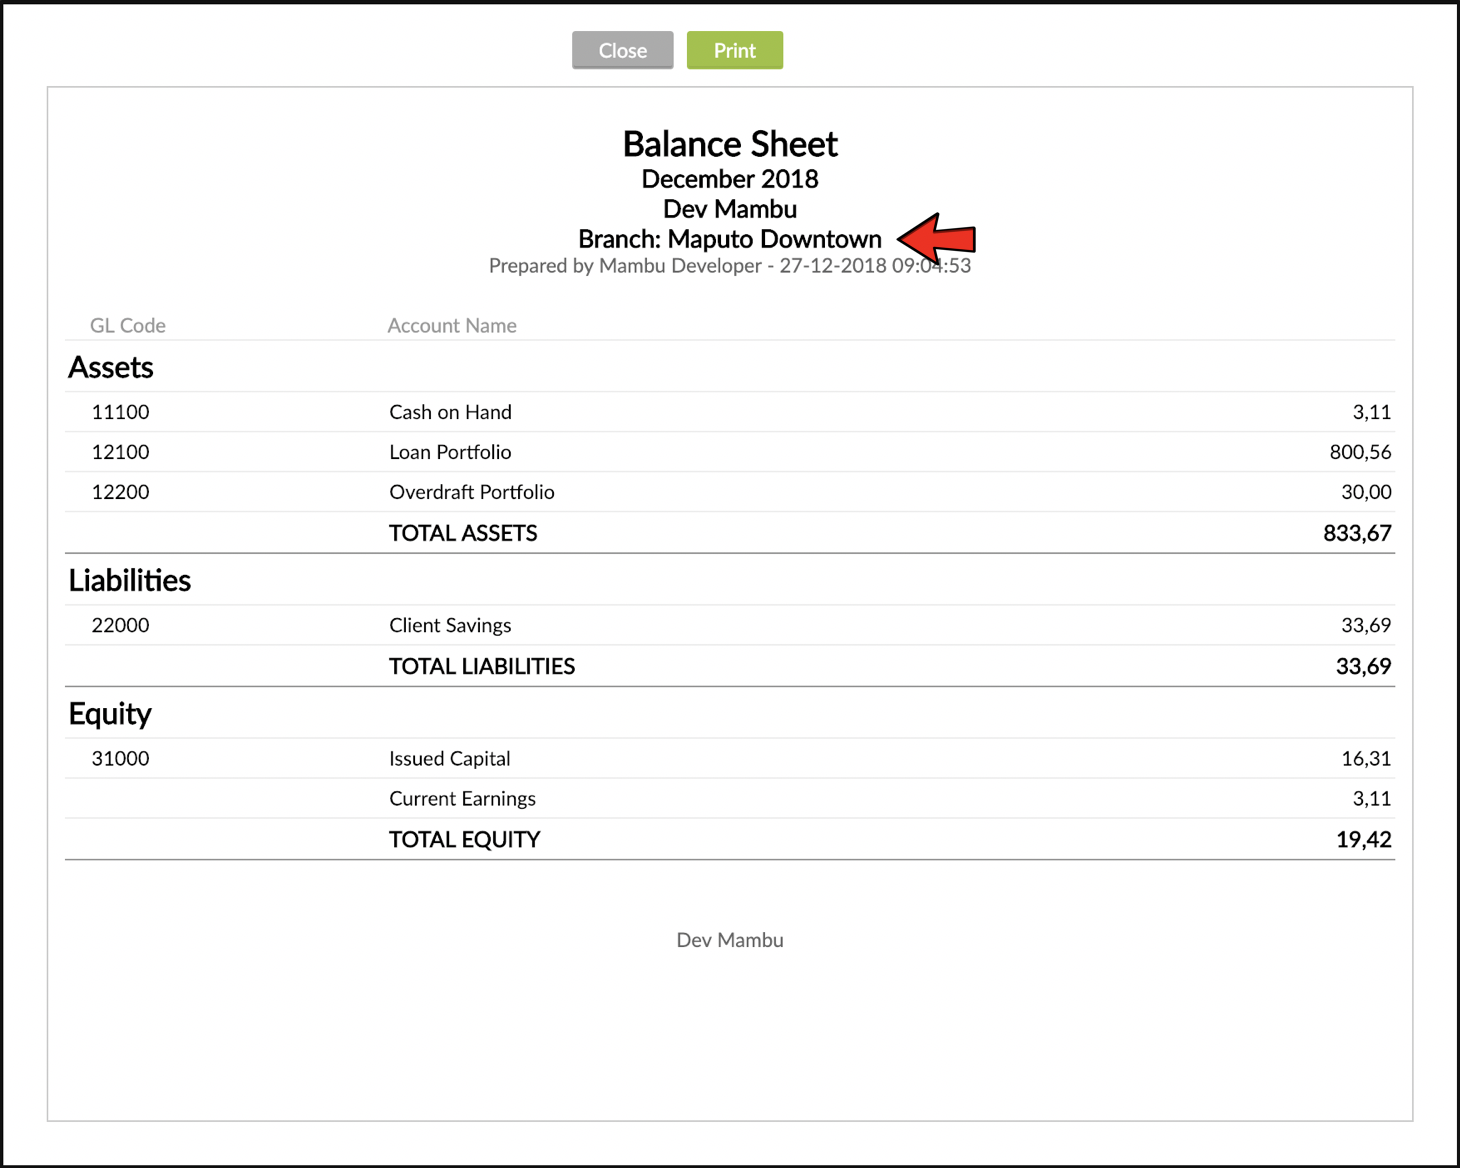 Branch Level Account Reports with information like name of report, period, branch and many more.